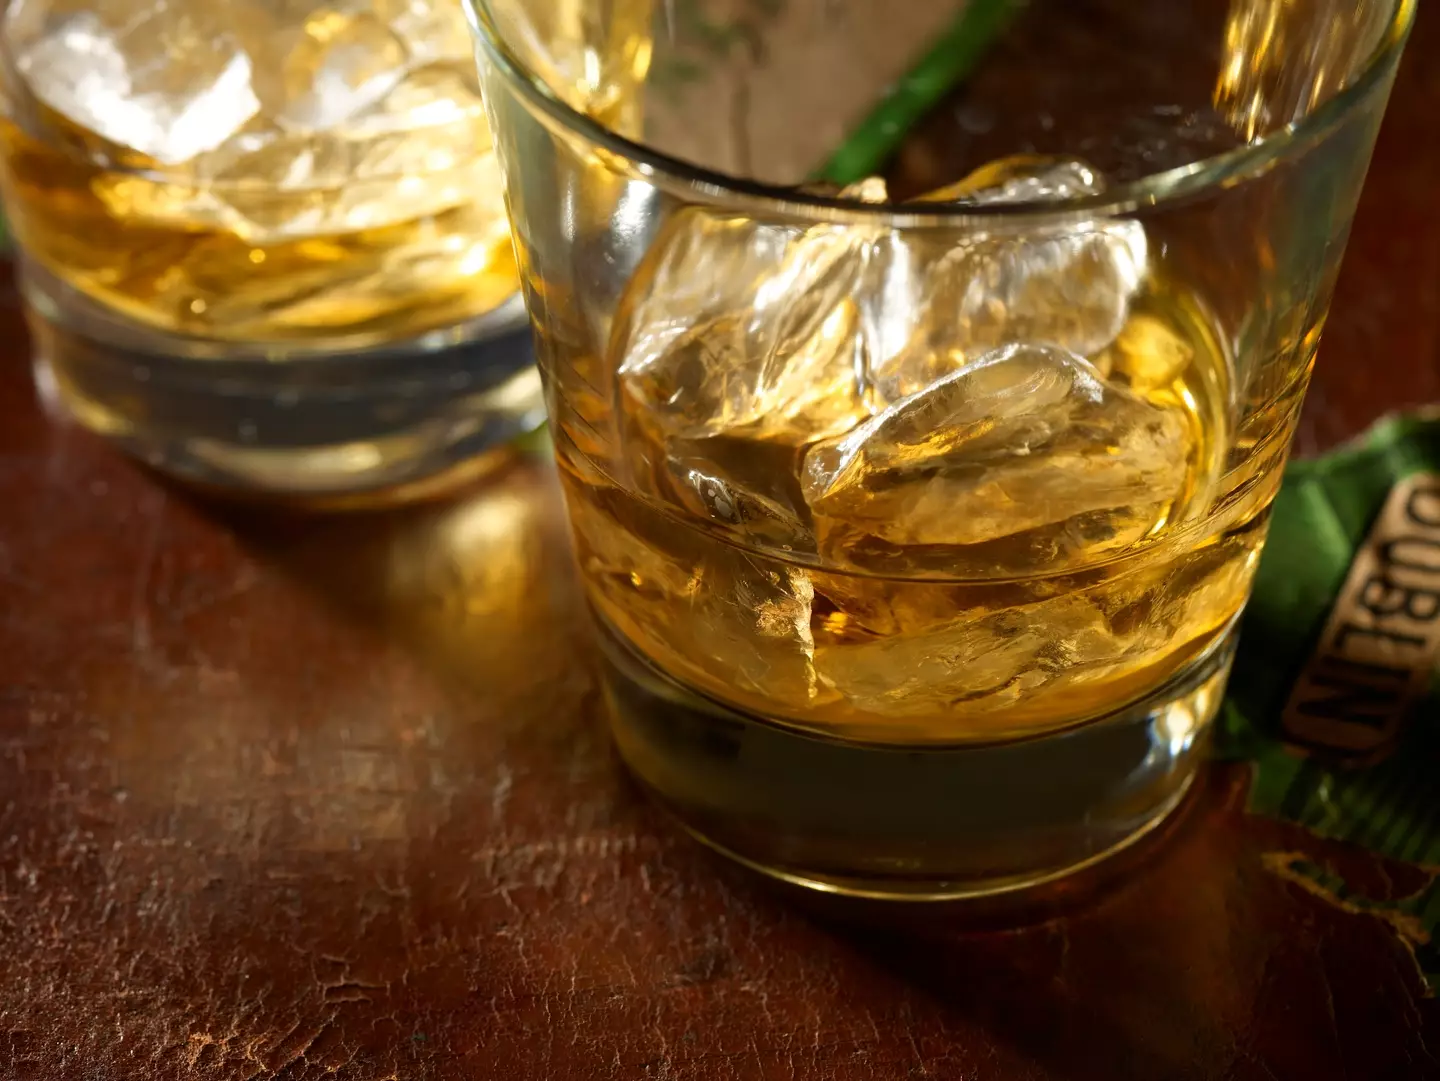 Glasses of whisky on the rocks. (Getty Stock Image)